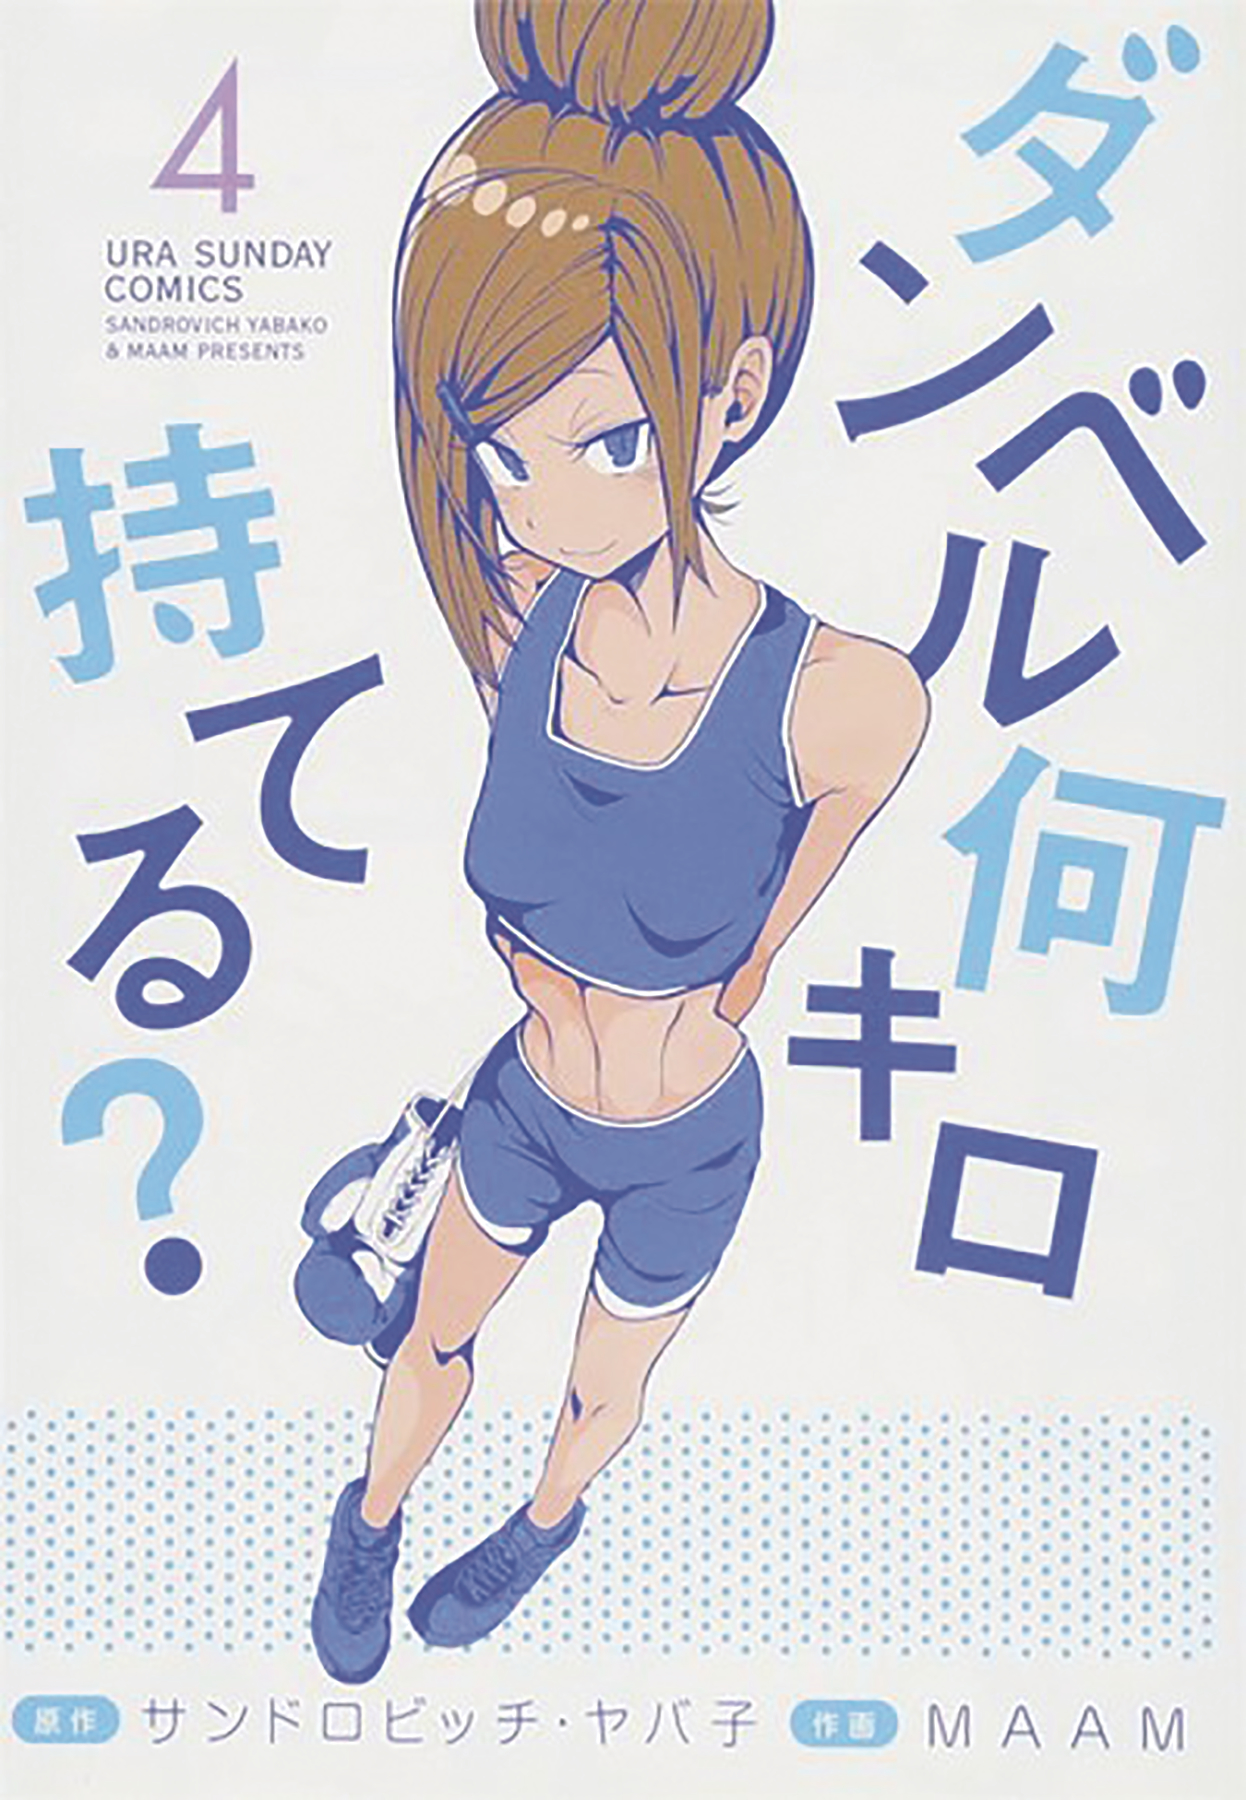 How Heavy are the Dumbbells You Lift Manga Volume 4 (Mature)